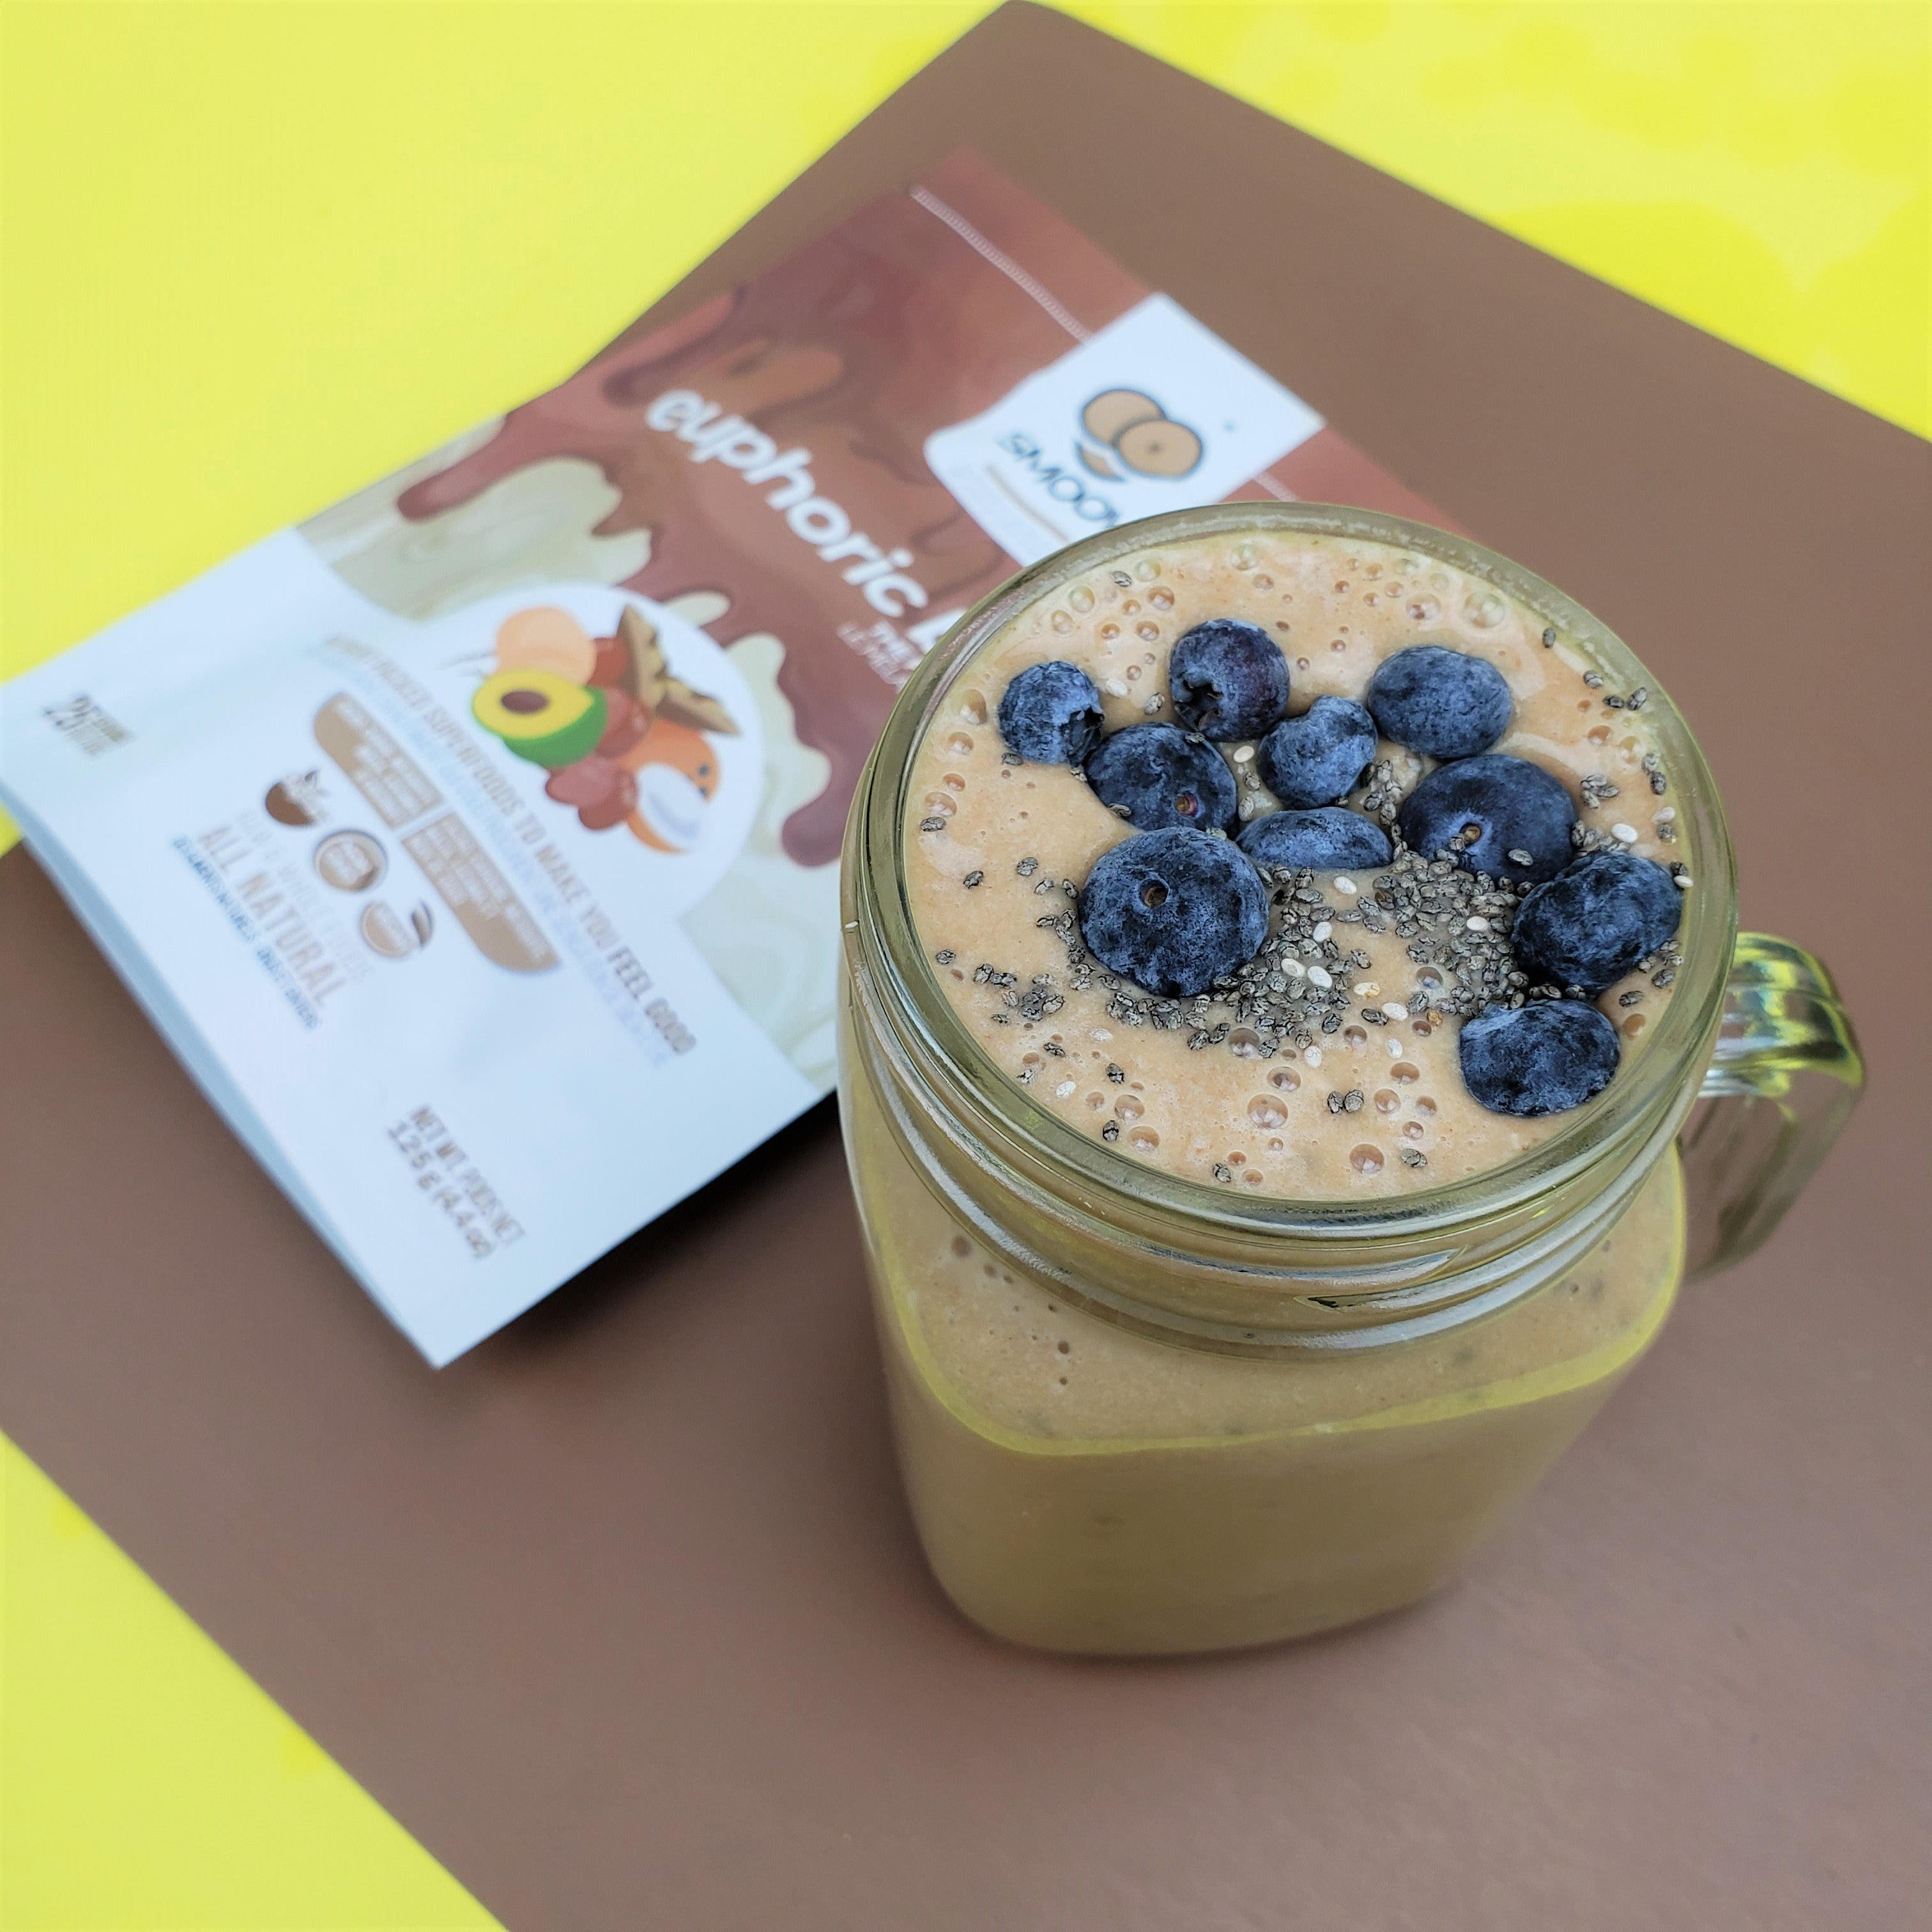 Looking for a pick-me-up? Craving a chocolatey beverage? Why not have smoothie for dessert. Packed with micronutrients and an instant mood-booster. 